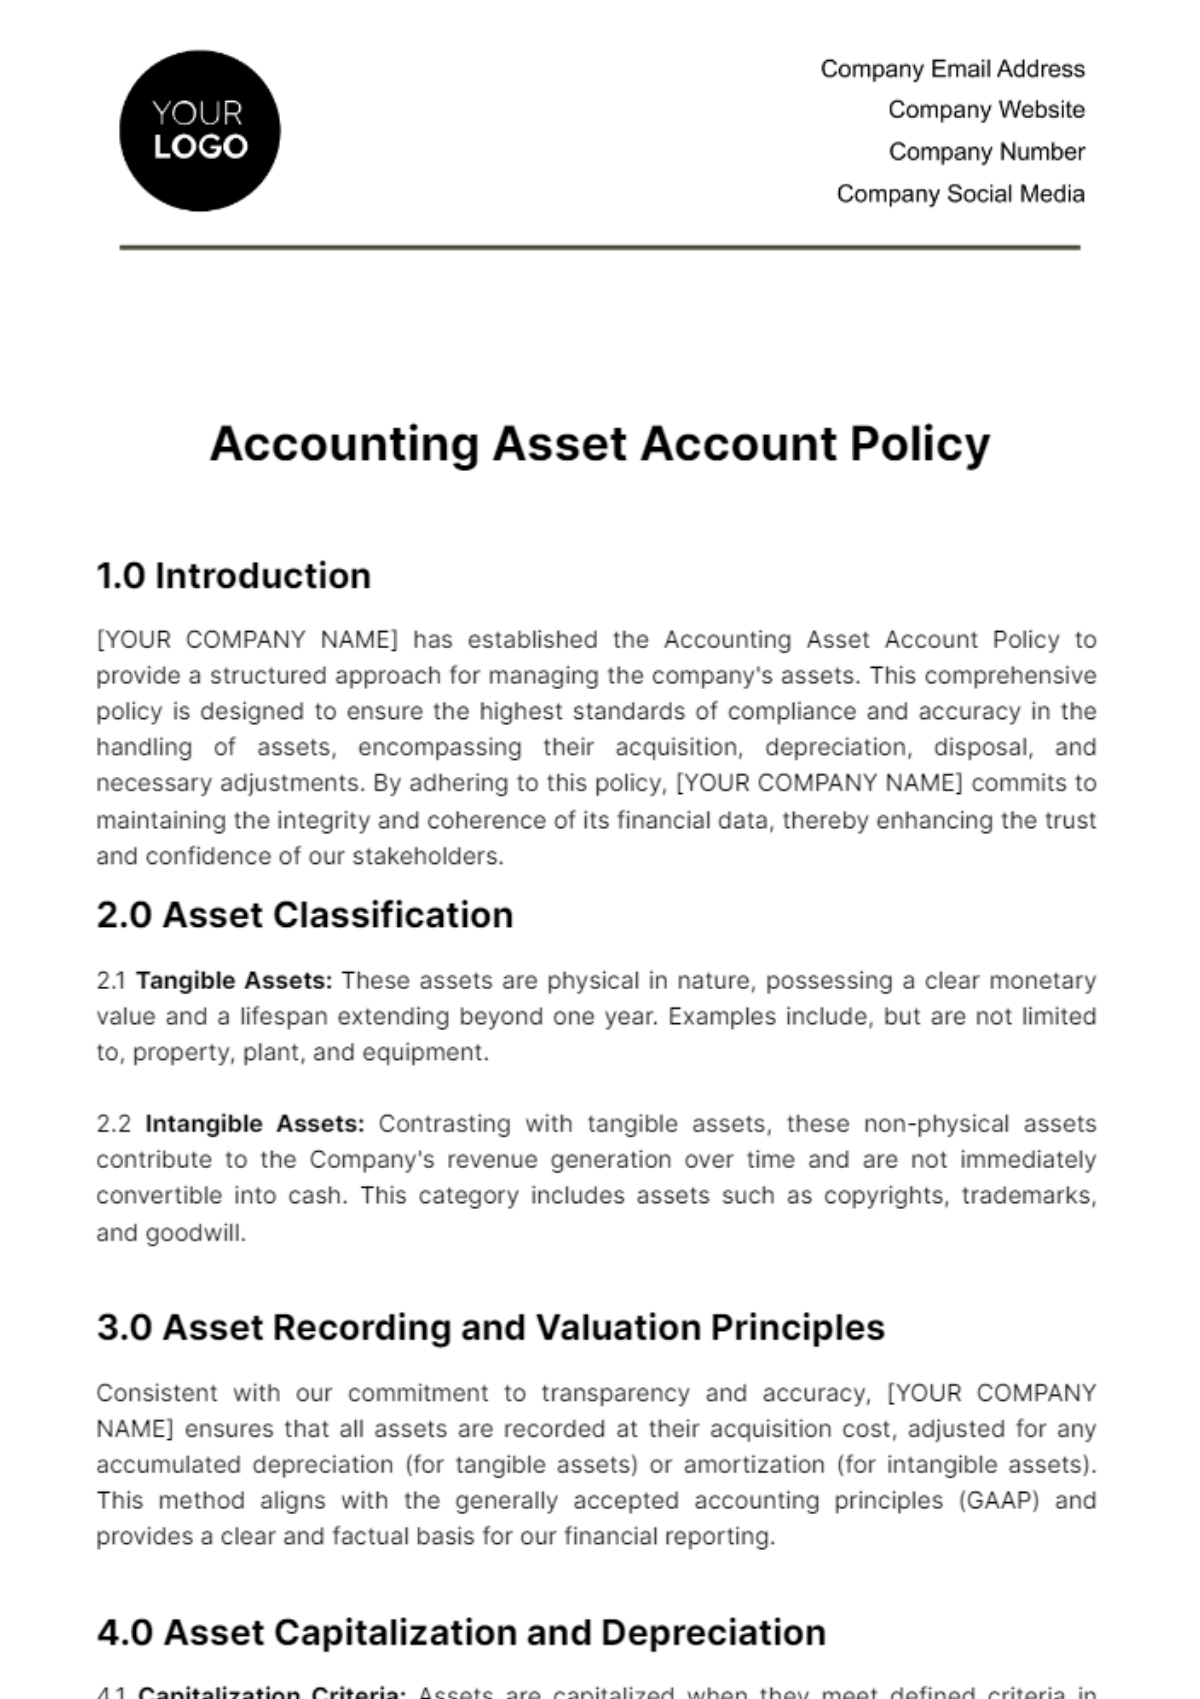 Free Accounting Asset Account Policy Template